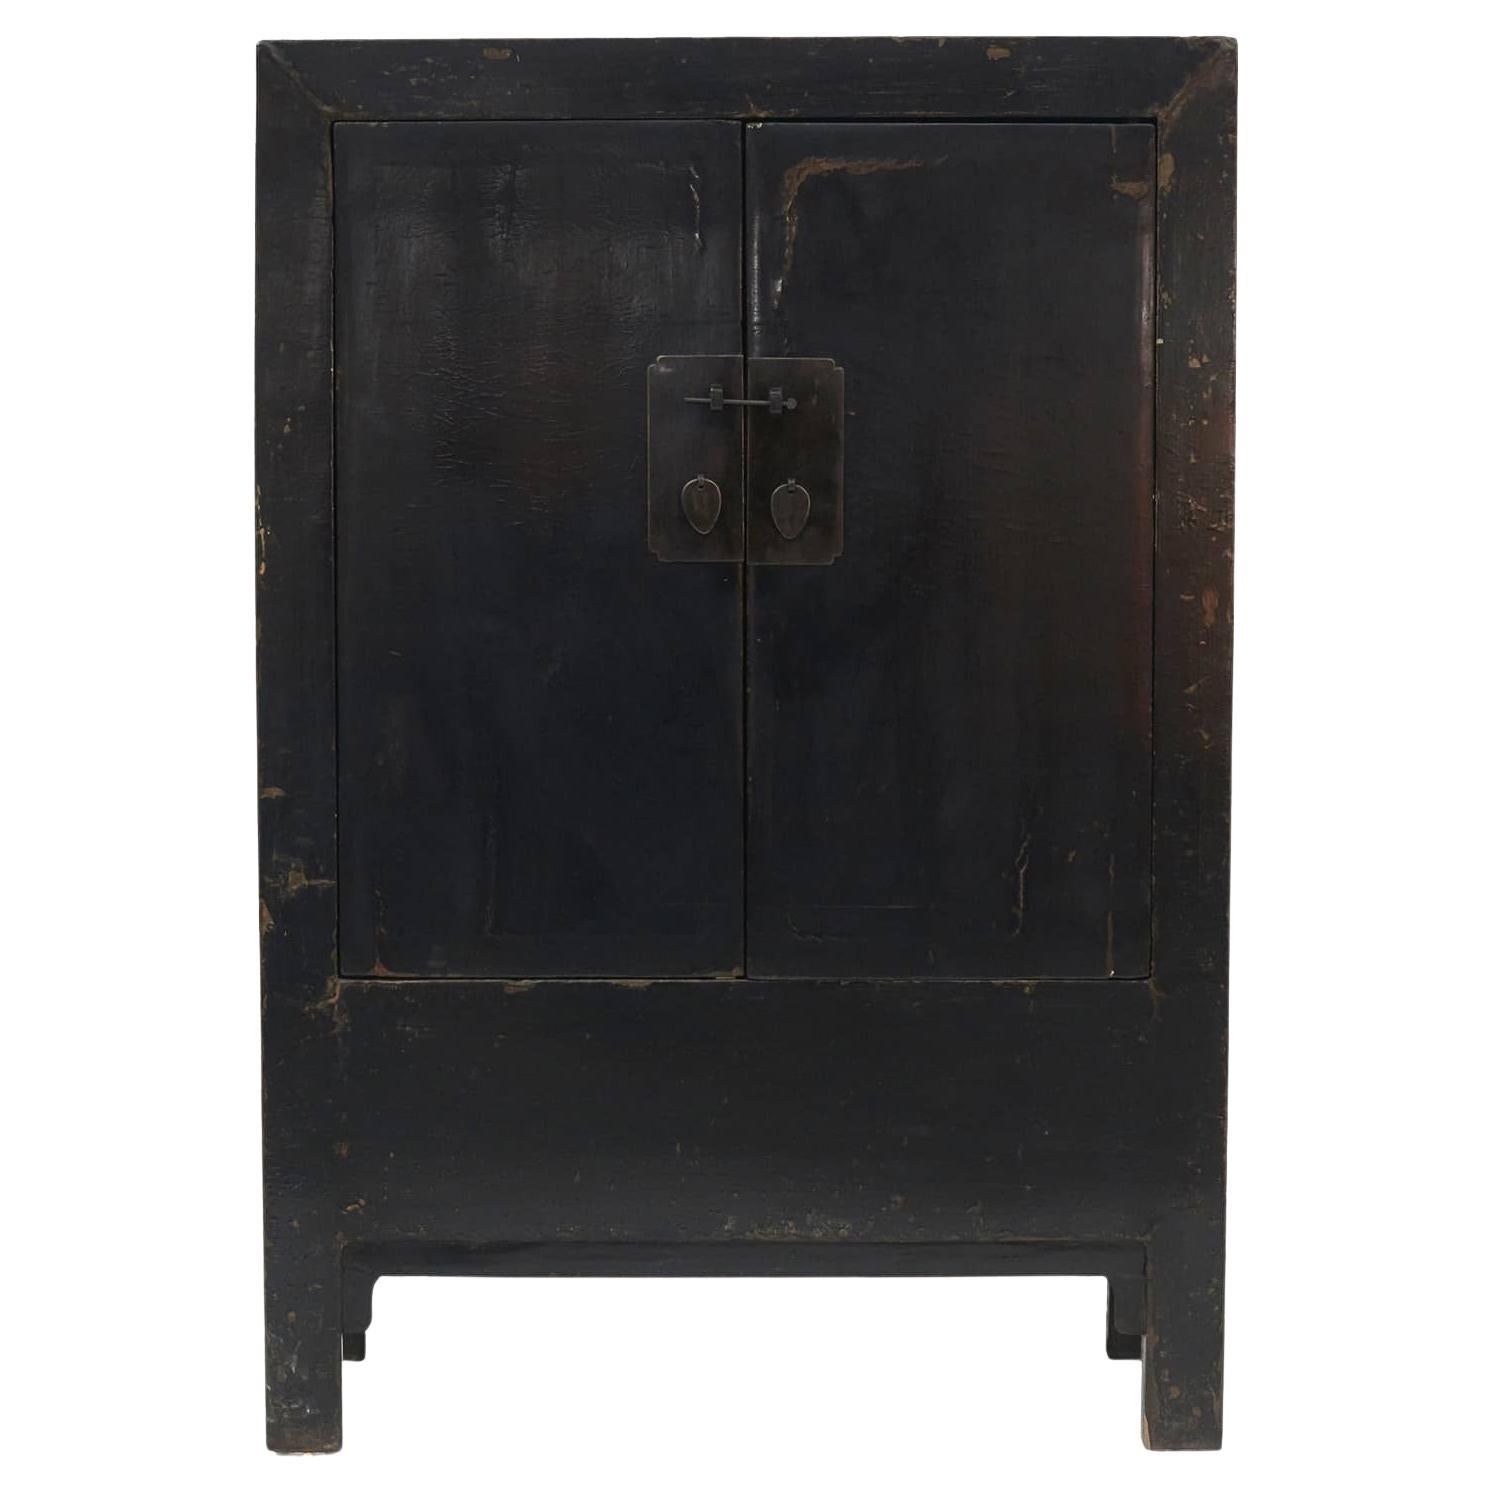 Cabinet in Original Black Lacquer, Shanxi Province, 1820-1830